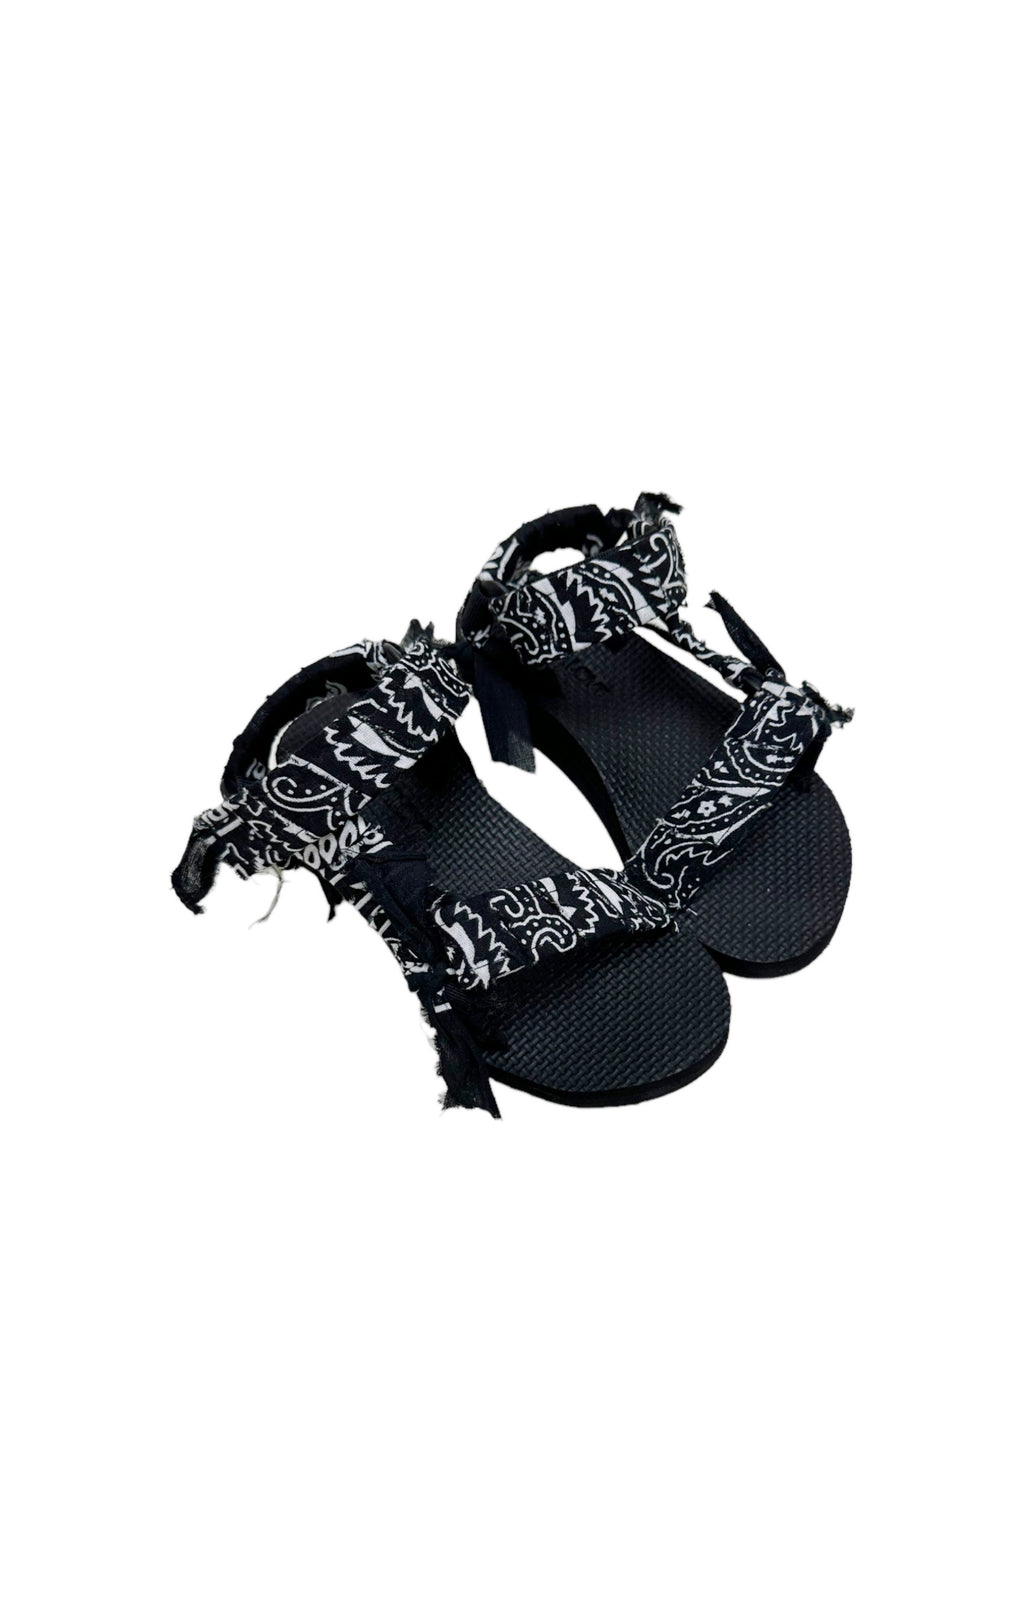 ARIZONA LOVE (NEW) Sandals Size: EUR 28-29 / Fit like Toddler US 11-11.5